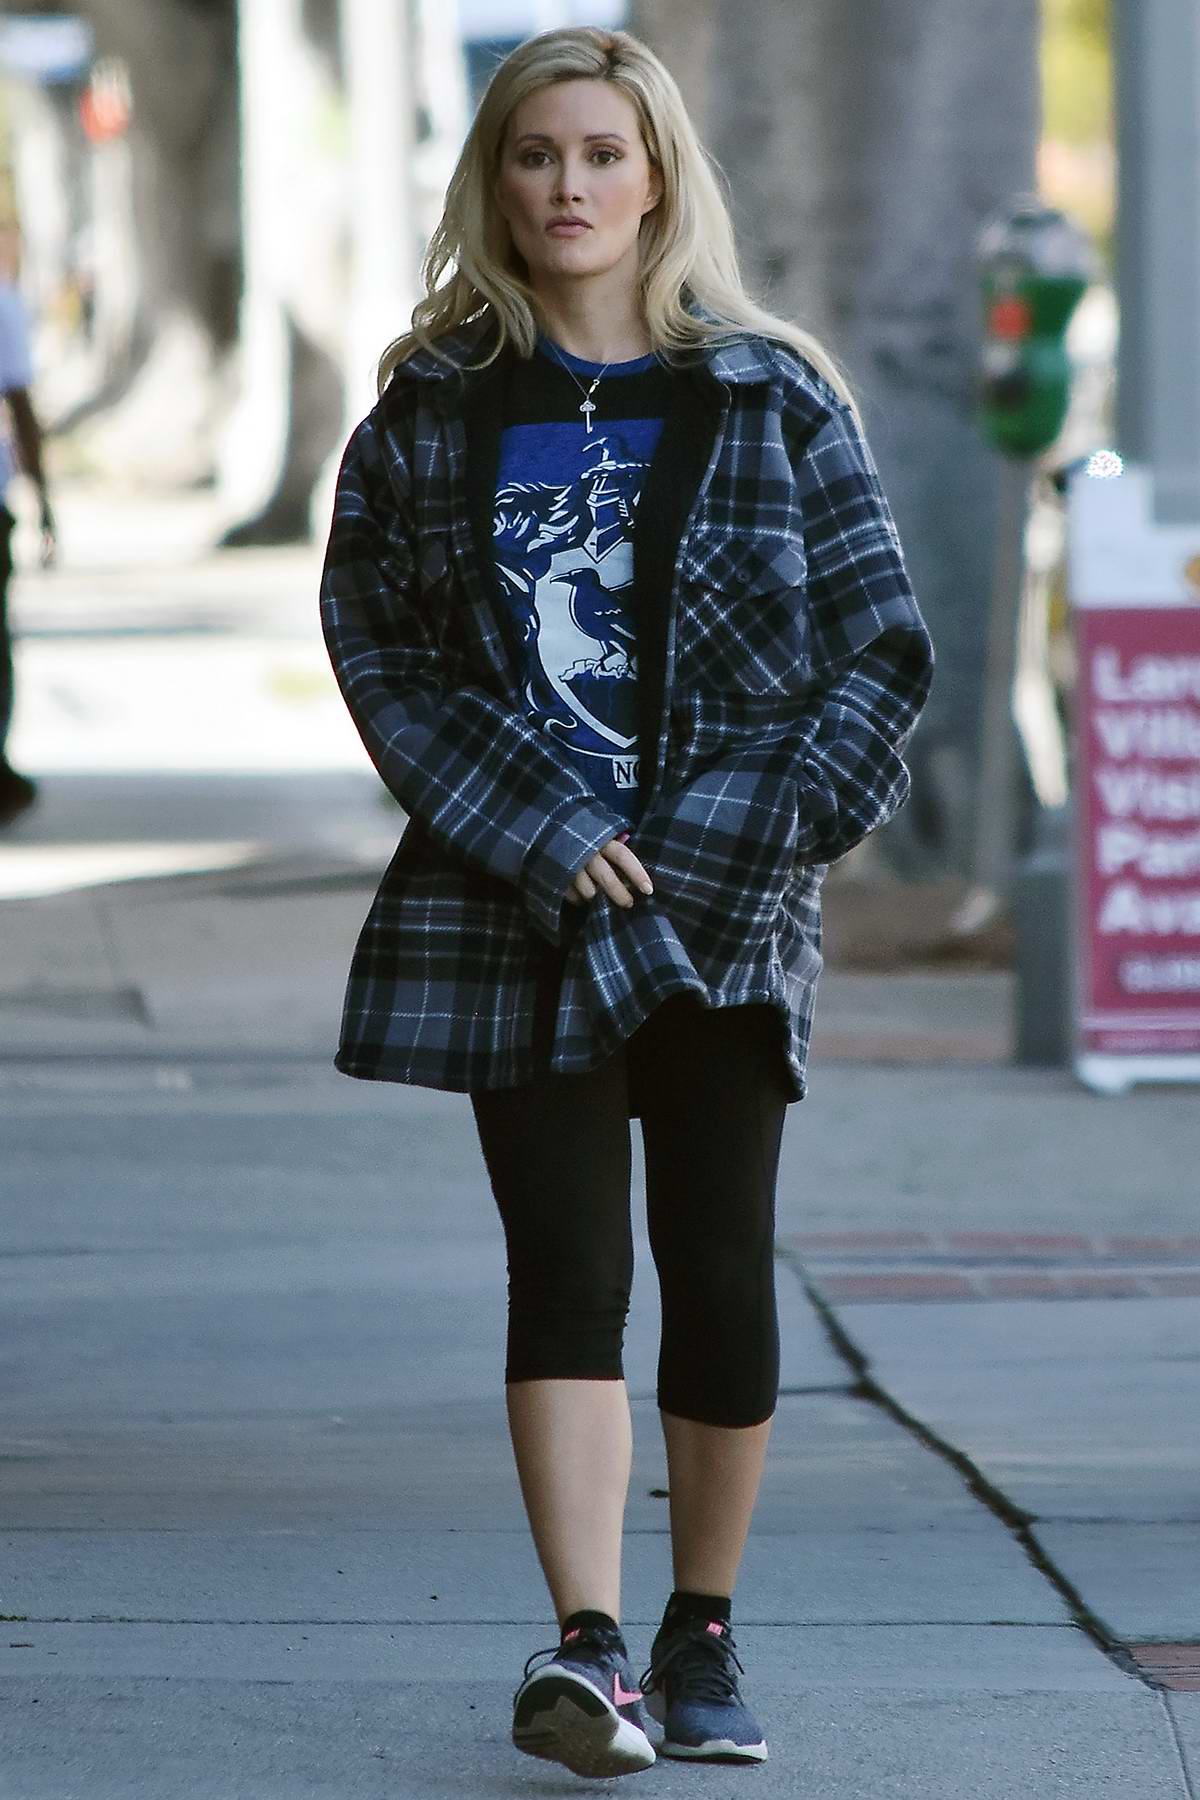 https://www.celebsfirst.com/wp-content/uploads/2020/03/holly-madison-wears-a-checkered-flannel-shirt-and-leggings-while-out-for-a-walk-in-studio-city-california-230320_4.jpg